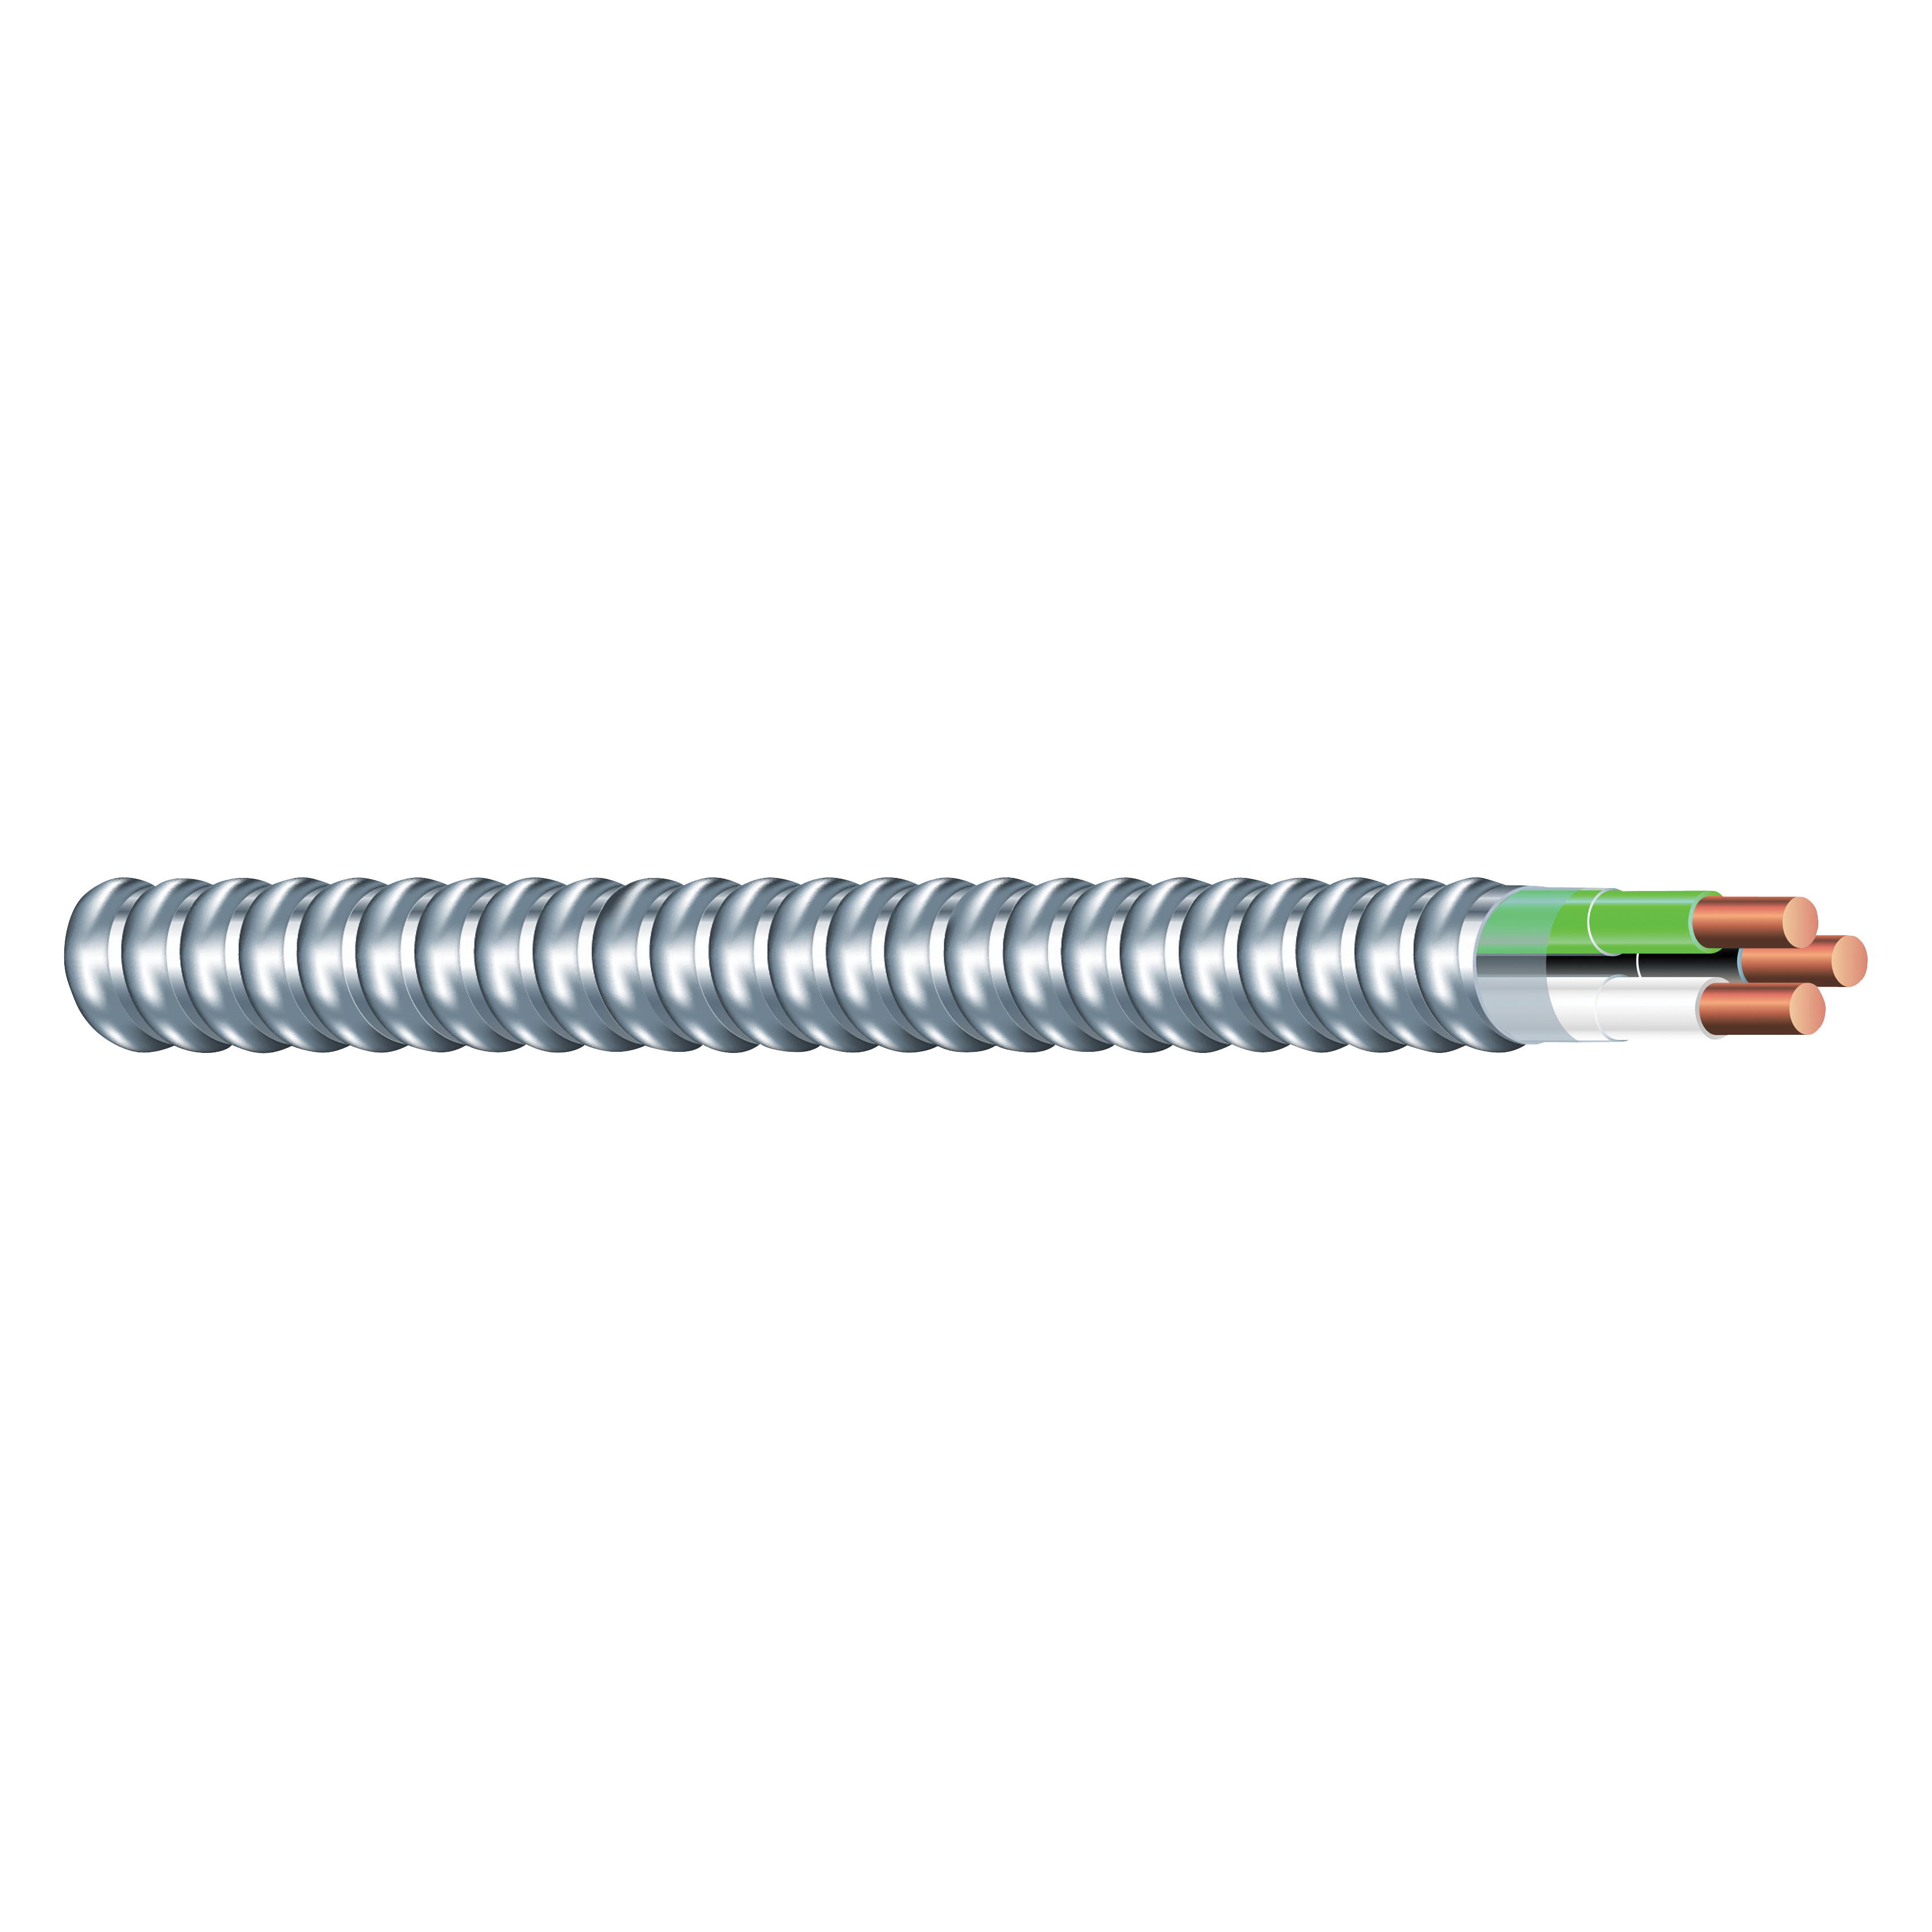 Southwire Armorlite 68580021 Armored Cable, 12 AWG Cable, 2 -Conductor, 25 ft L, Copper Conductor - 1